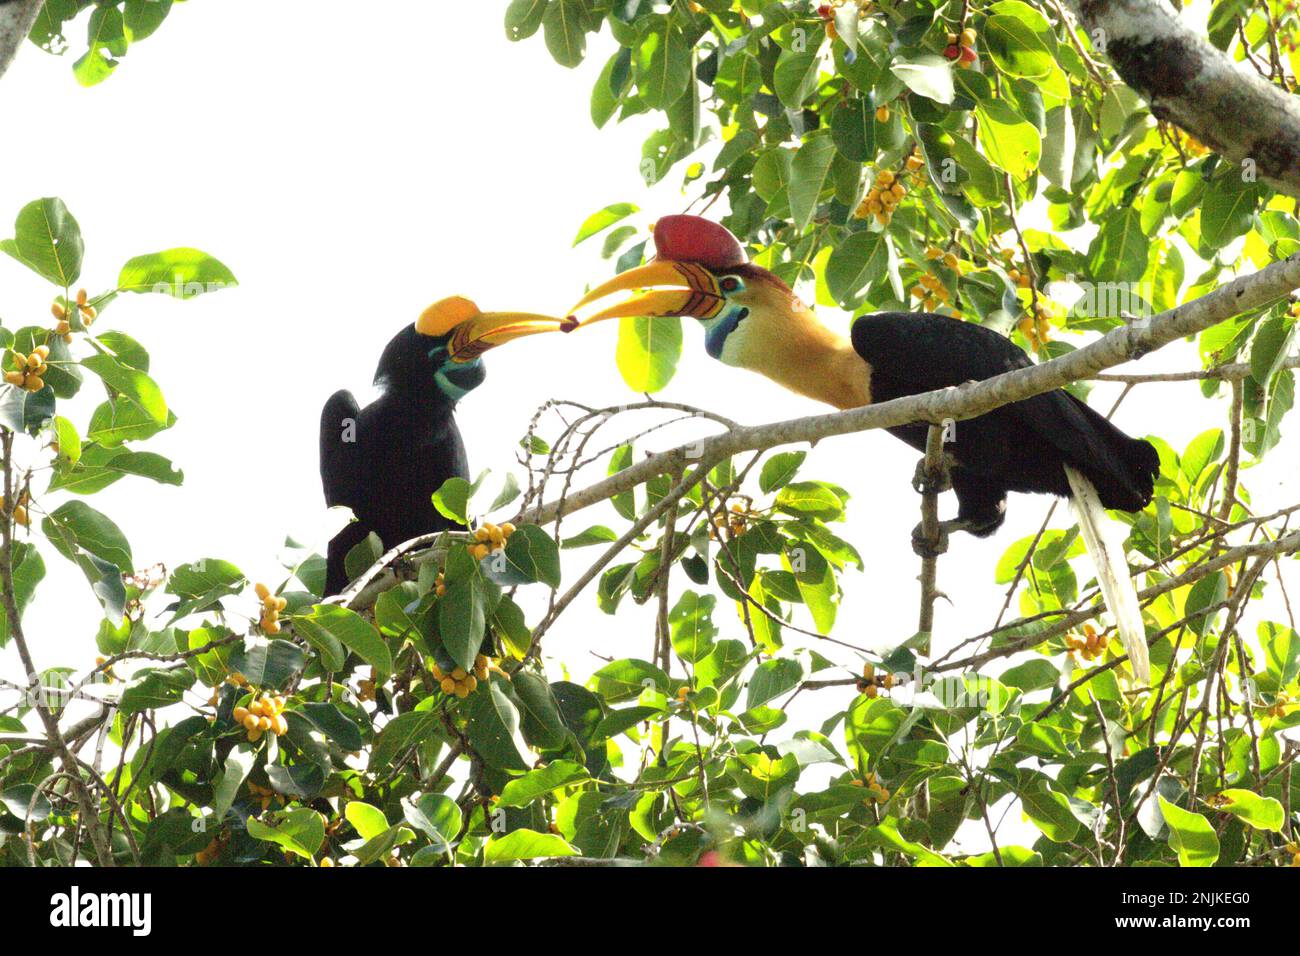 A pair of knobbed hornbills, or sometimes called Sulawesi wrinkled hornbill (Rhyticeros cassidix), is sharing food as they are foraging on a ficus (fig) tree in Tangkoko Nature Reserve, North Sulawesi, Indonesia. Due to their dependency on forest and certain types of trees, hornbills in general are threatened by climate change. 'There is rapidly growing evidence for the negative effects of high temperatures on the behavior, physiology, breeding, and survival of various bird, mammal, and reptile species around the world,' said Dr. Nicholas Pattinson, a scientist from University of Cape Town. Stock Photo